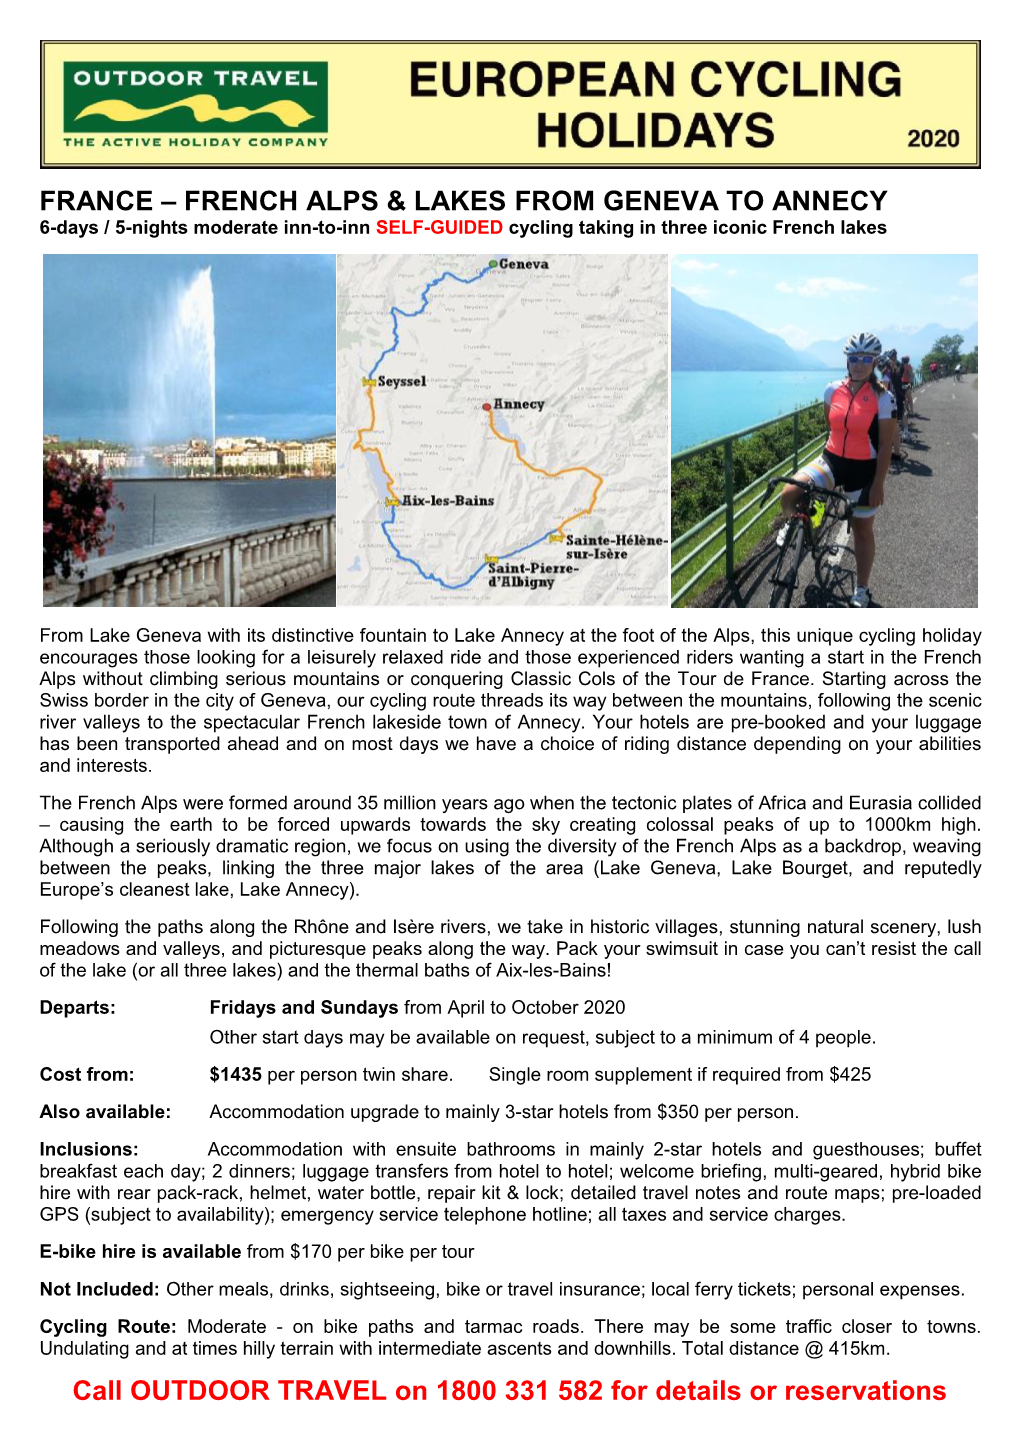 French Alps & Lakes SG Cycling